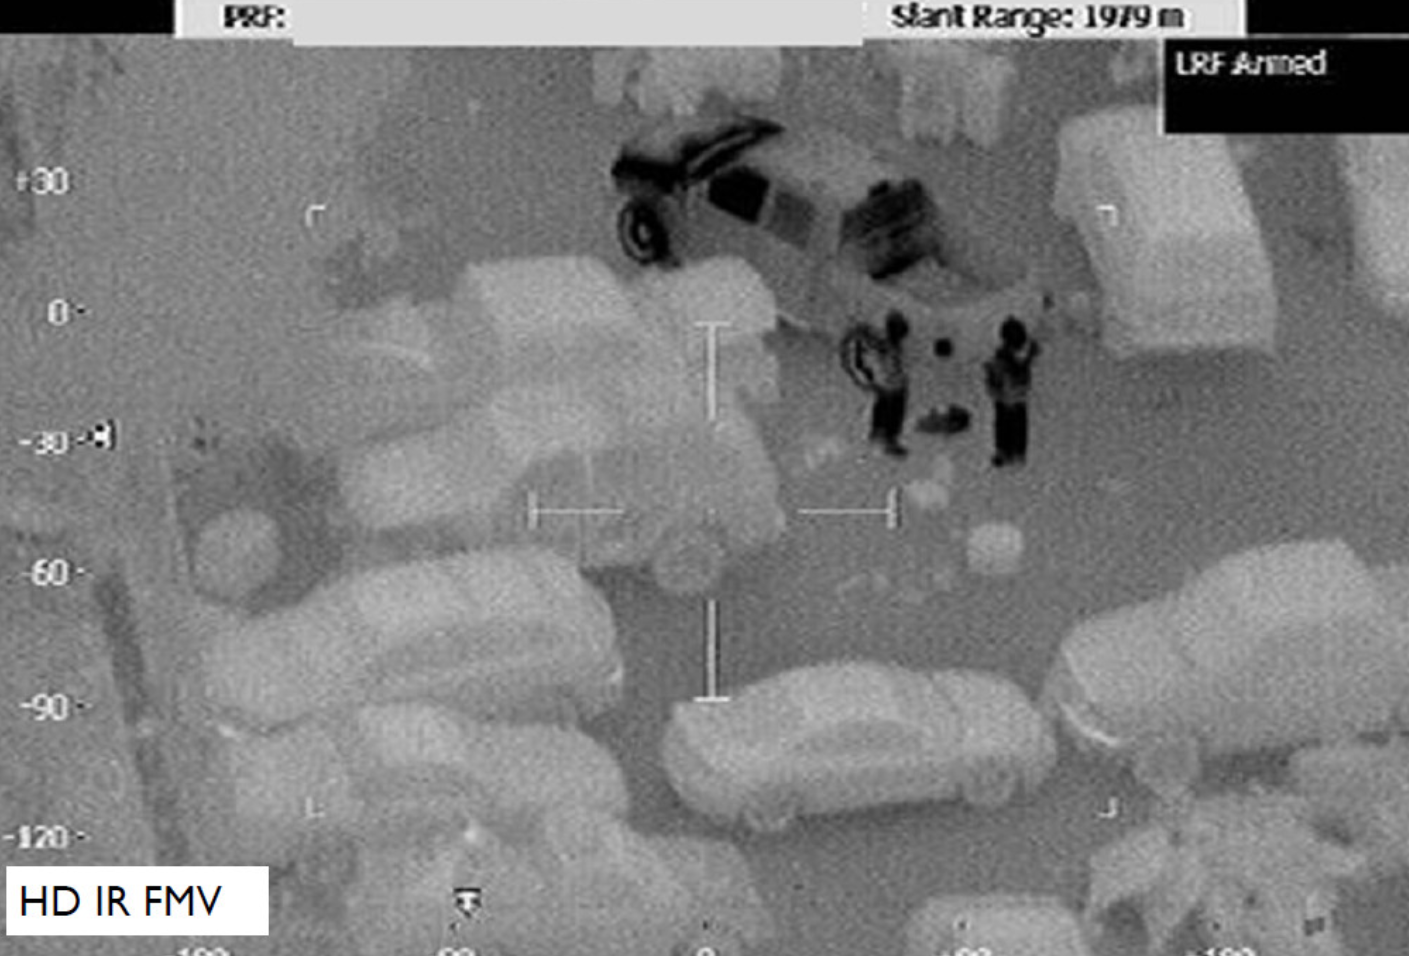 A sample of the infrared imagery the RC-26B was able to capture with its sensor turret.&nbsp;<em>National Guard Bureau via FOIA</em>